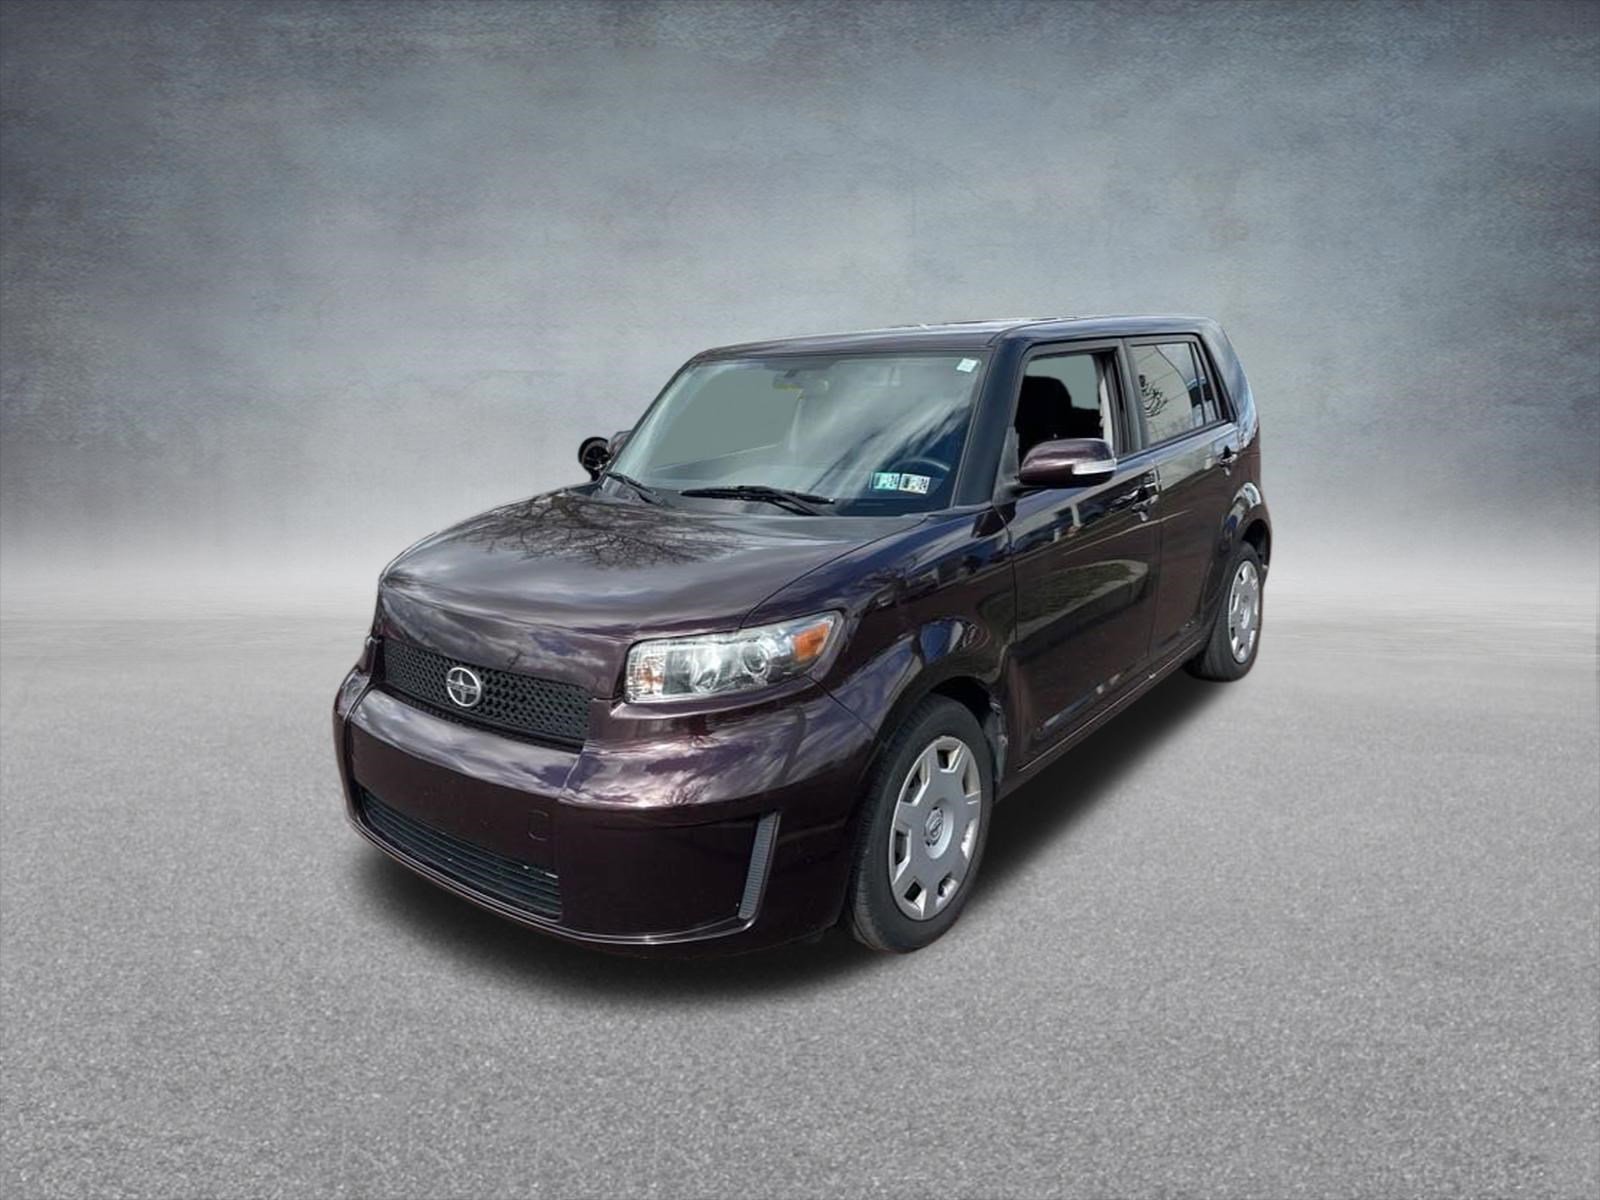 Used 2008 Scion xB  with VIN JTLKE50E381049108 for sale in Limerick, PA